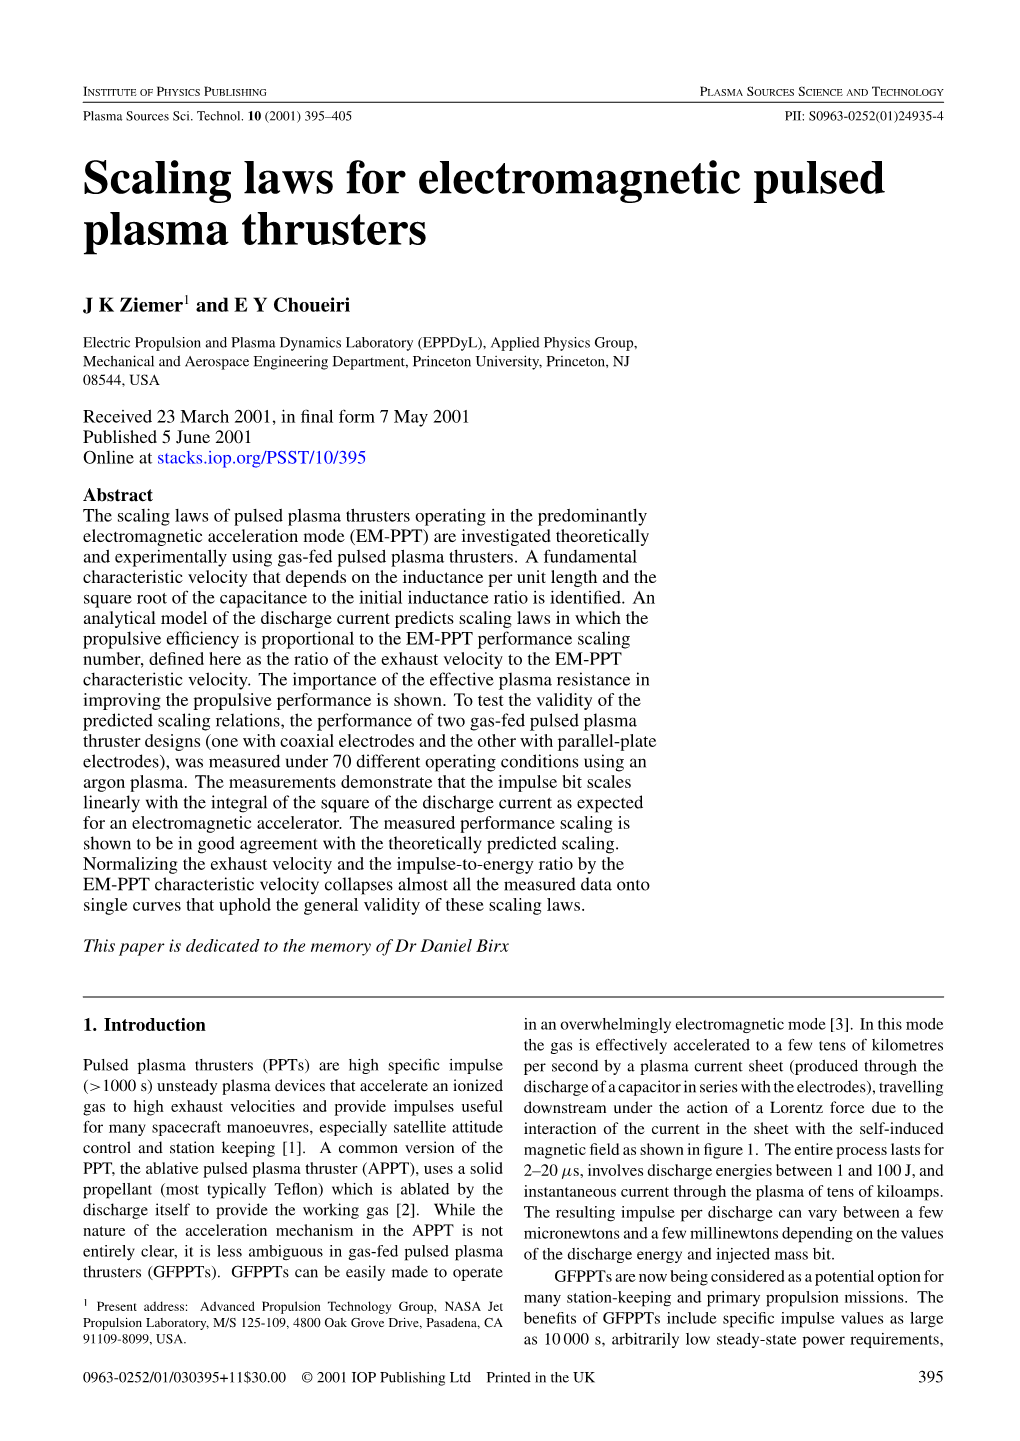 Scaling Laws for Electromagnetic Pulsed Plasma Thrusters